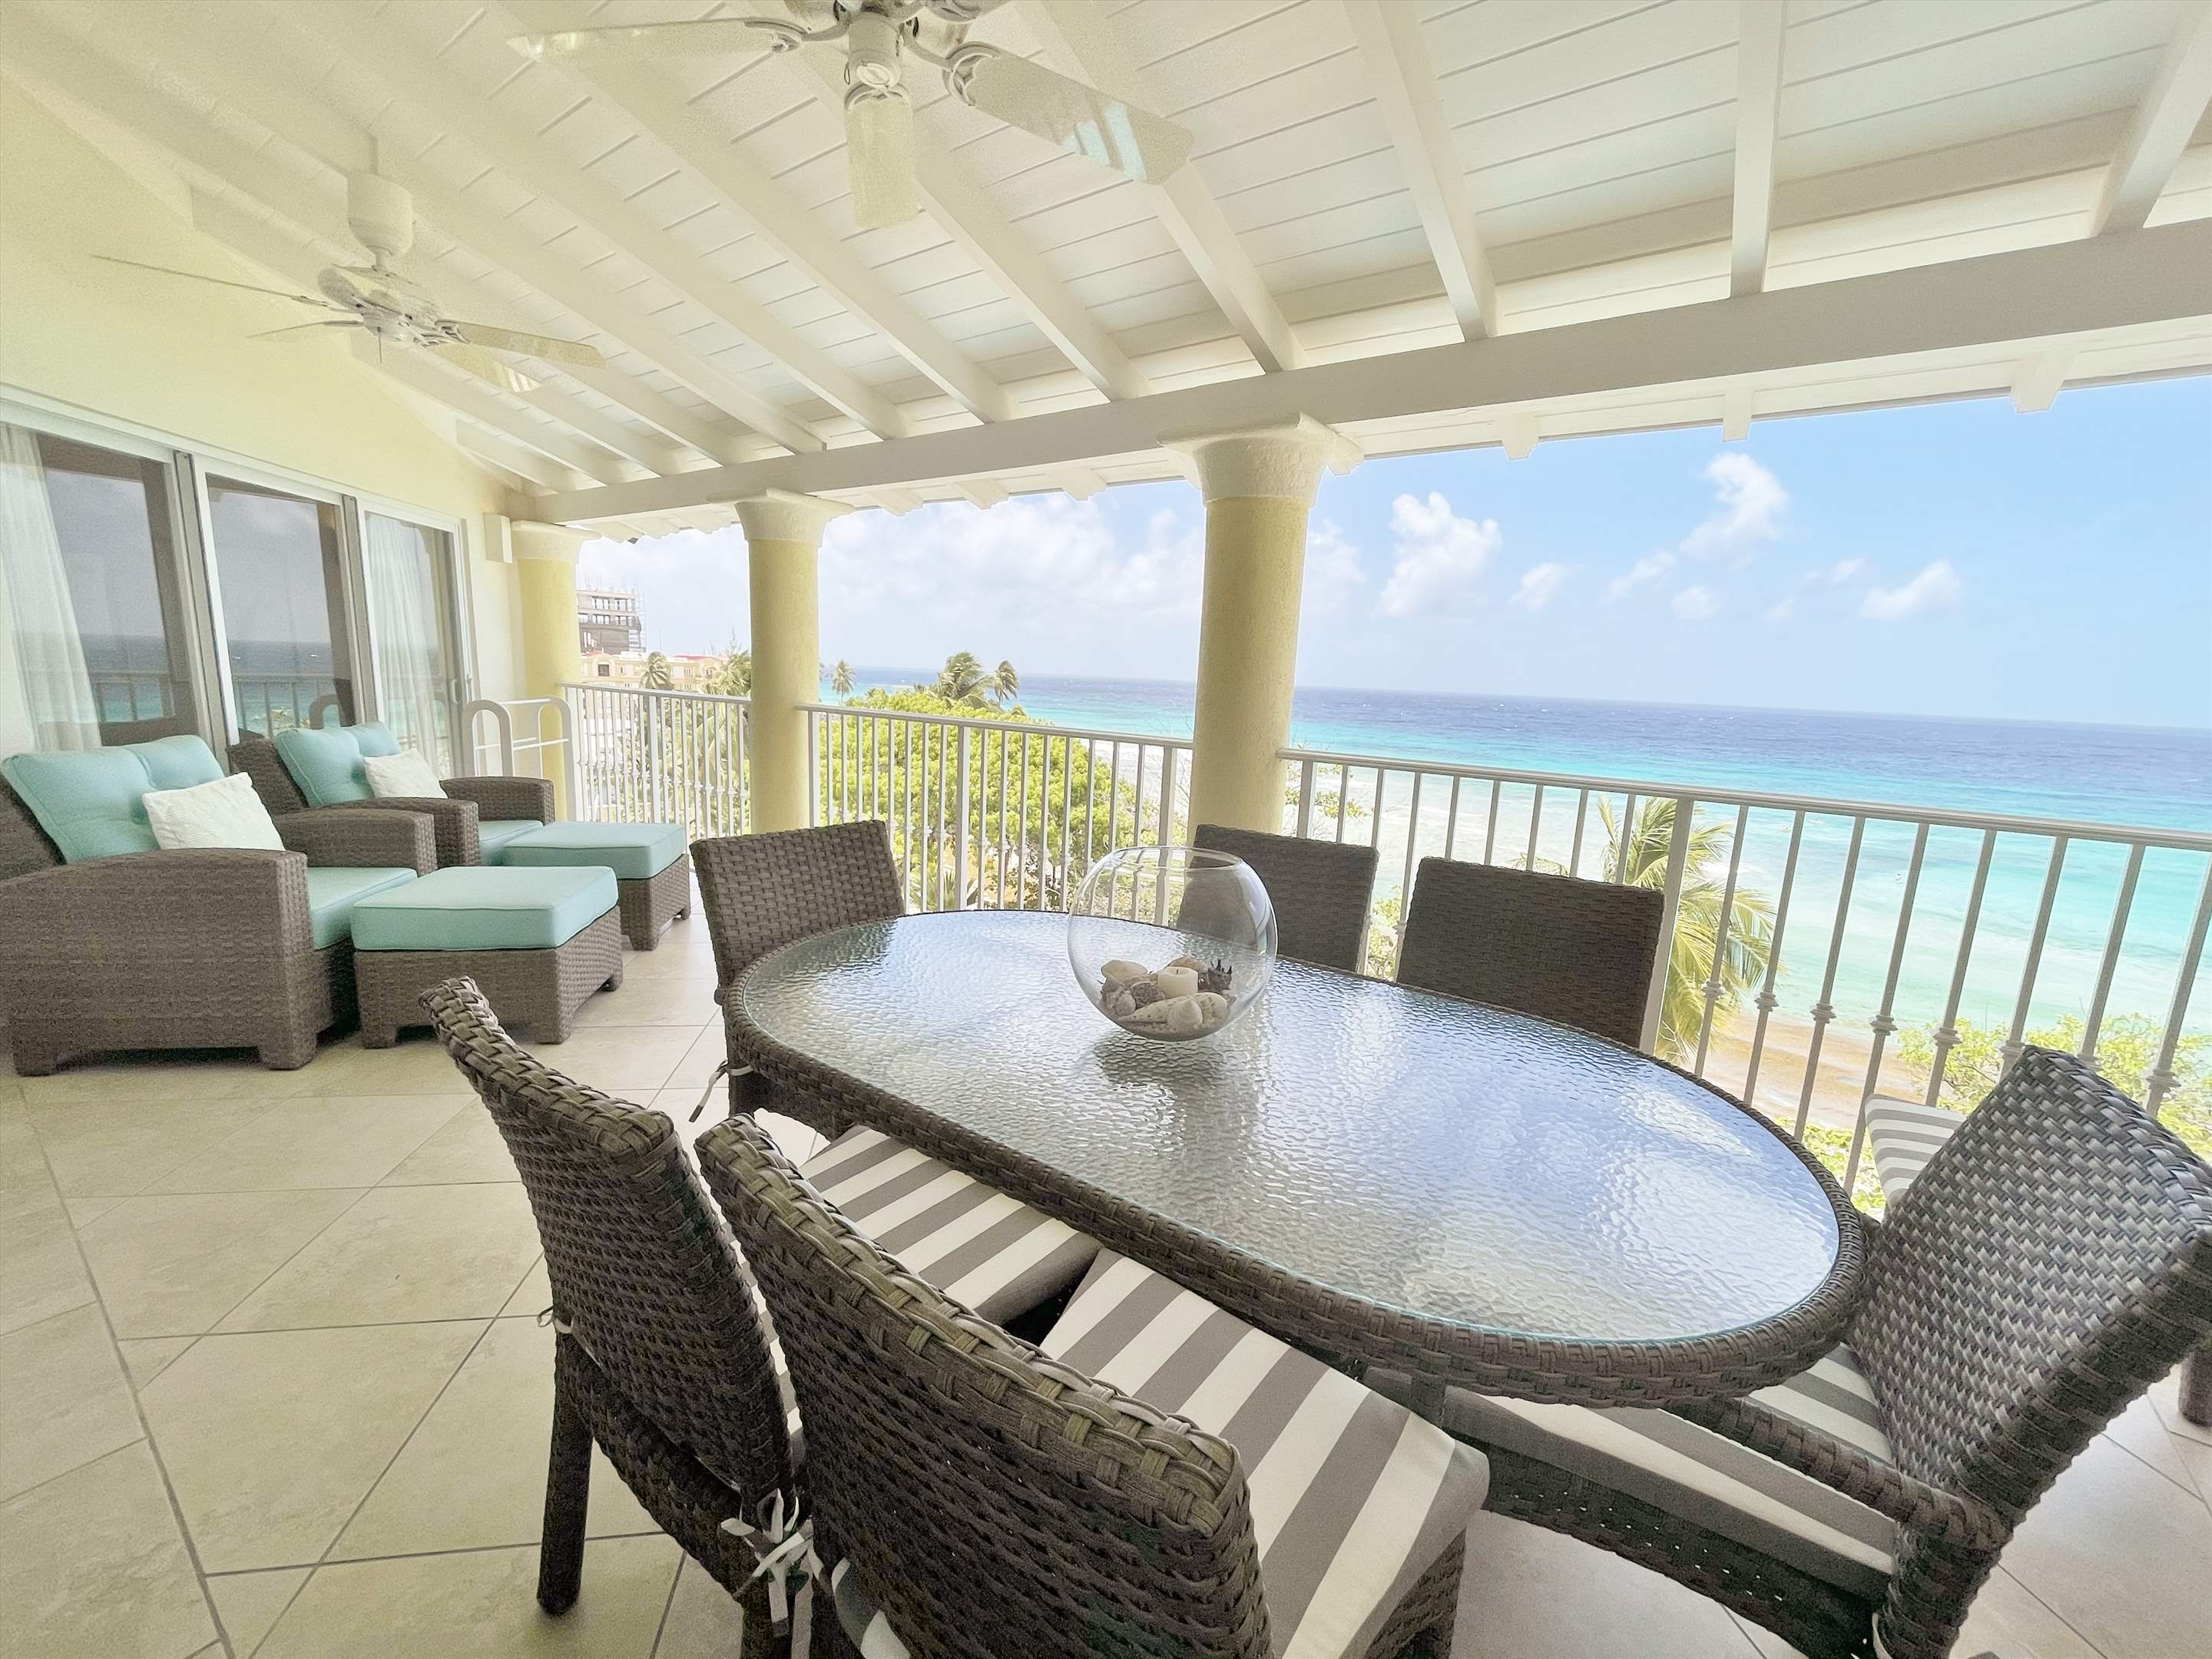 Sapphire Beach 505 , 2 Bedroom , 2 bedroom apartment in St. Lawrence Gap & South Coast, Barbados Photo #9